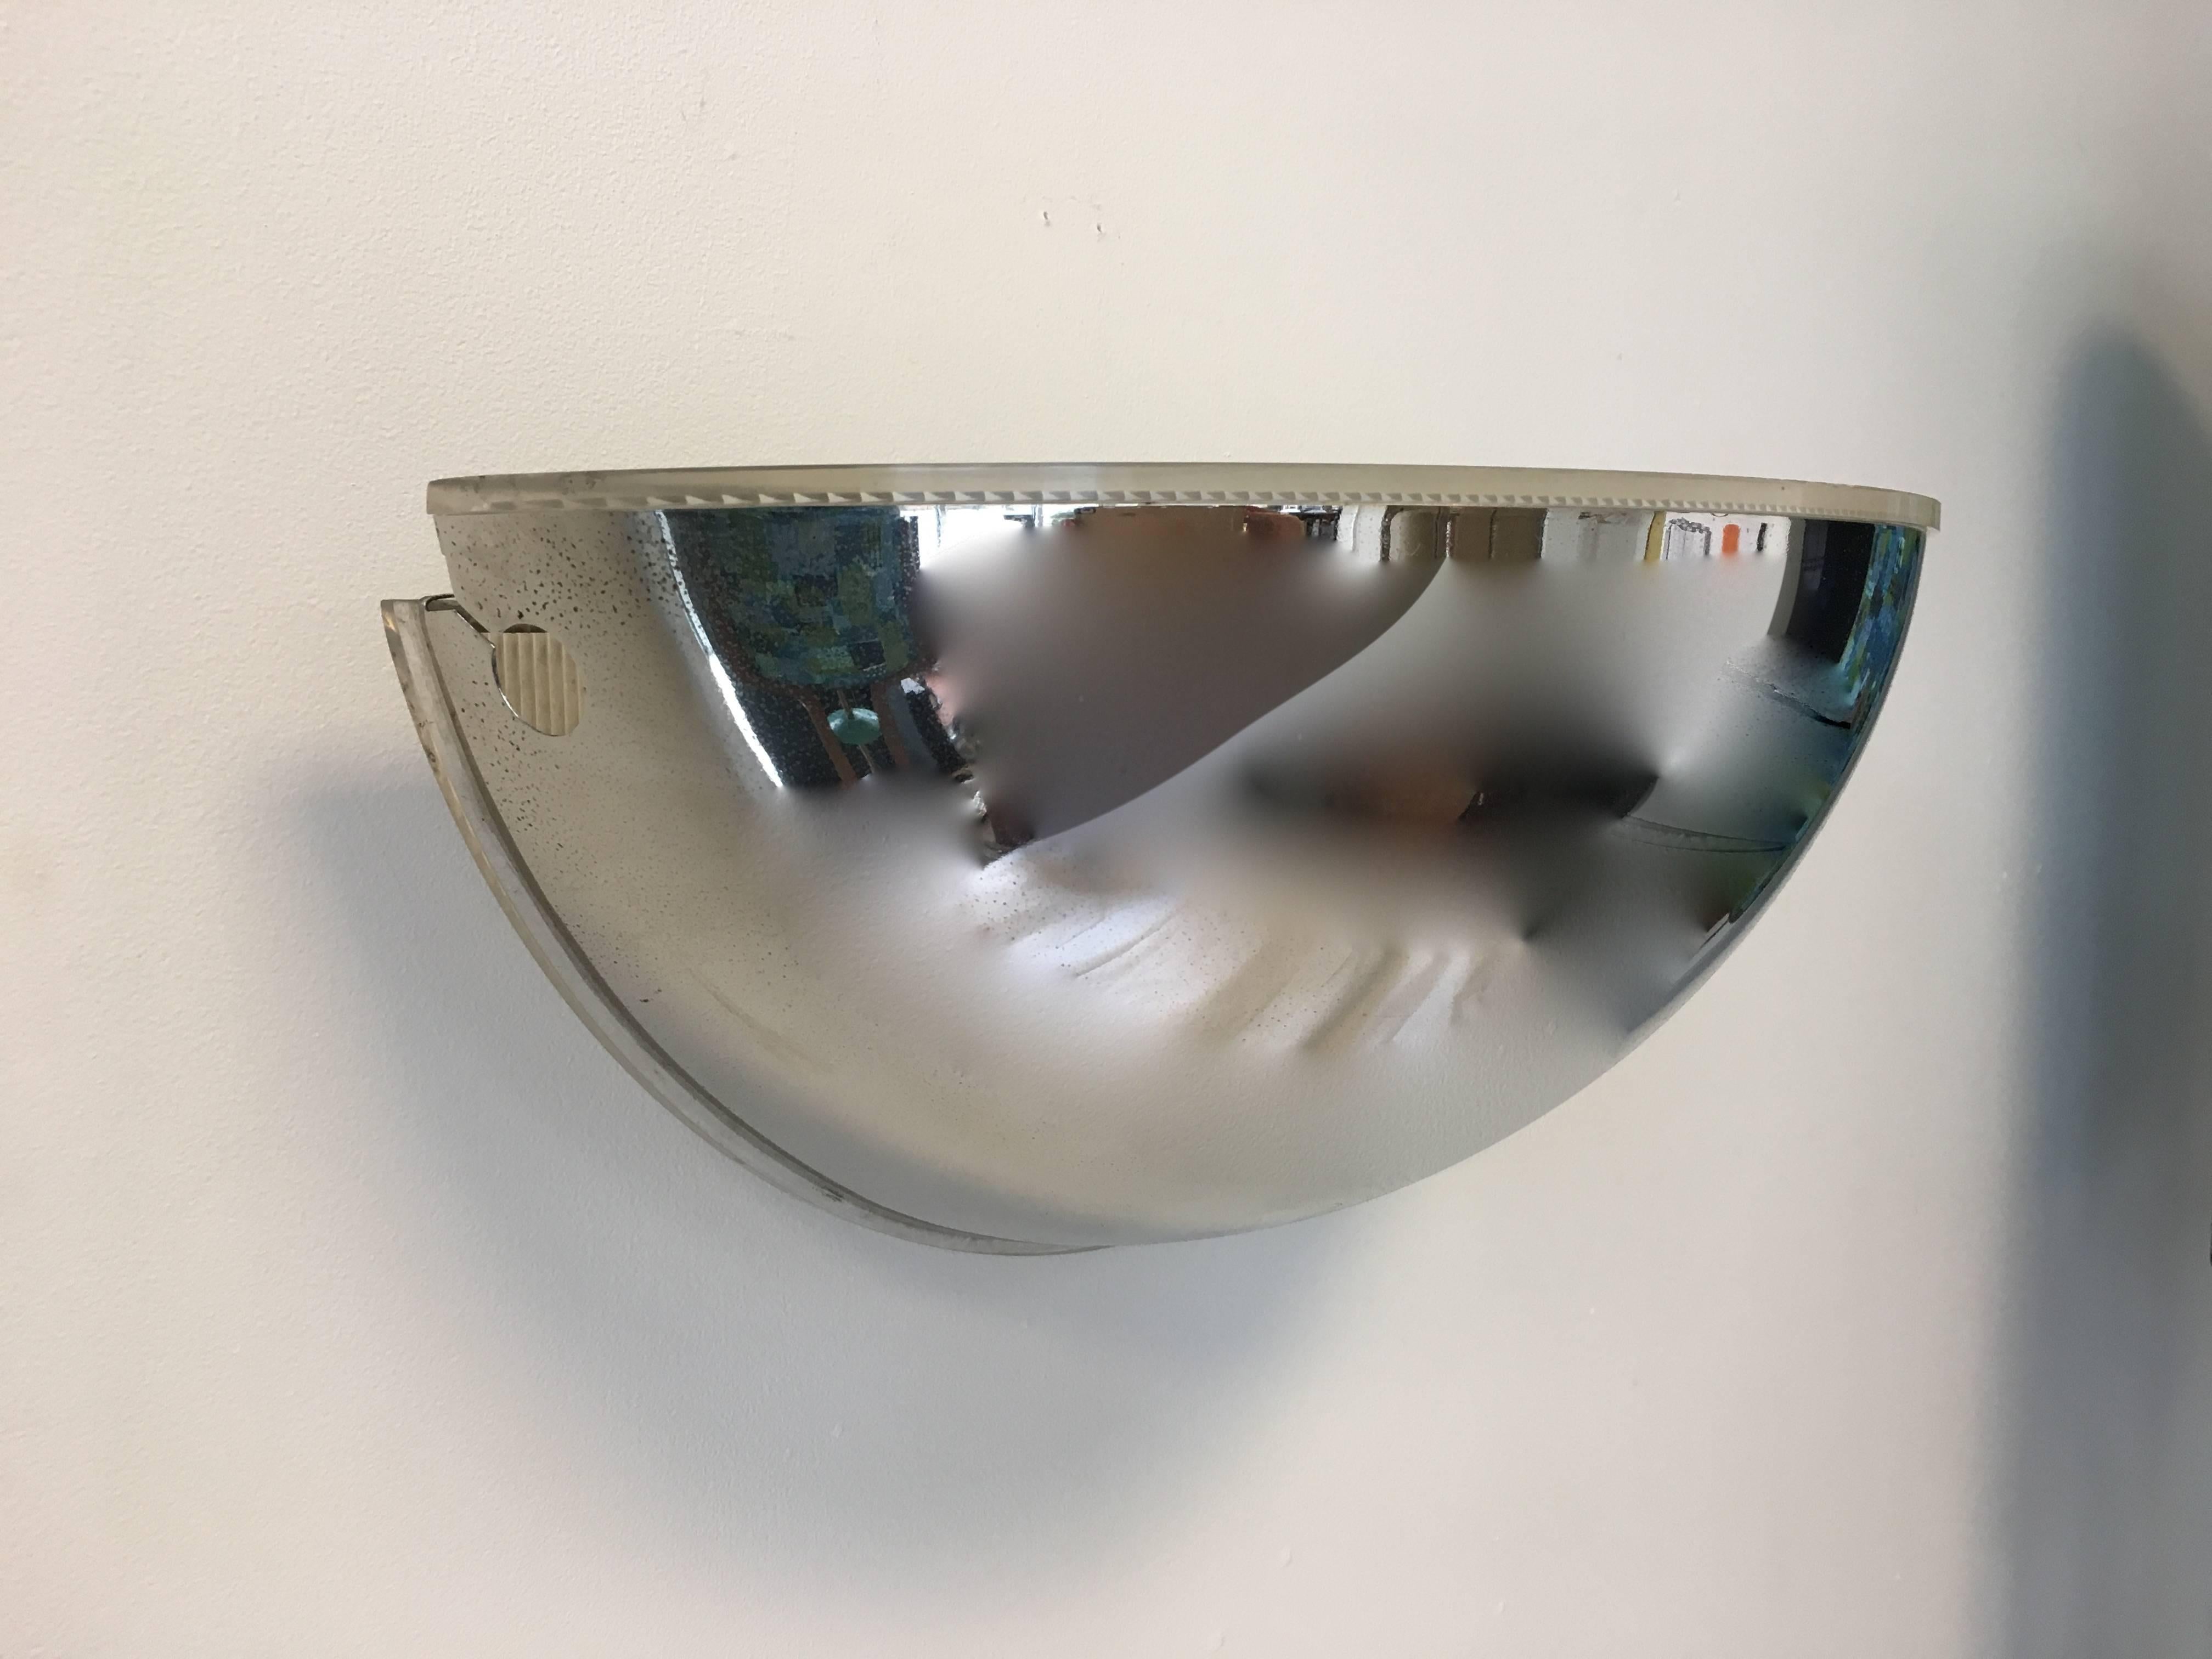 Italian Quarto Wall Sconce by Tobia Scarpa for Flos in Chrome and Lucite, 1970s For Sale